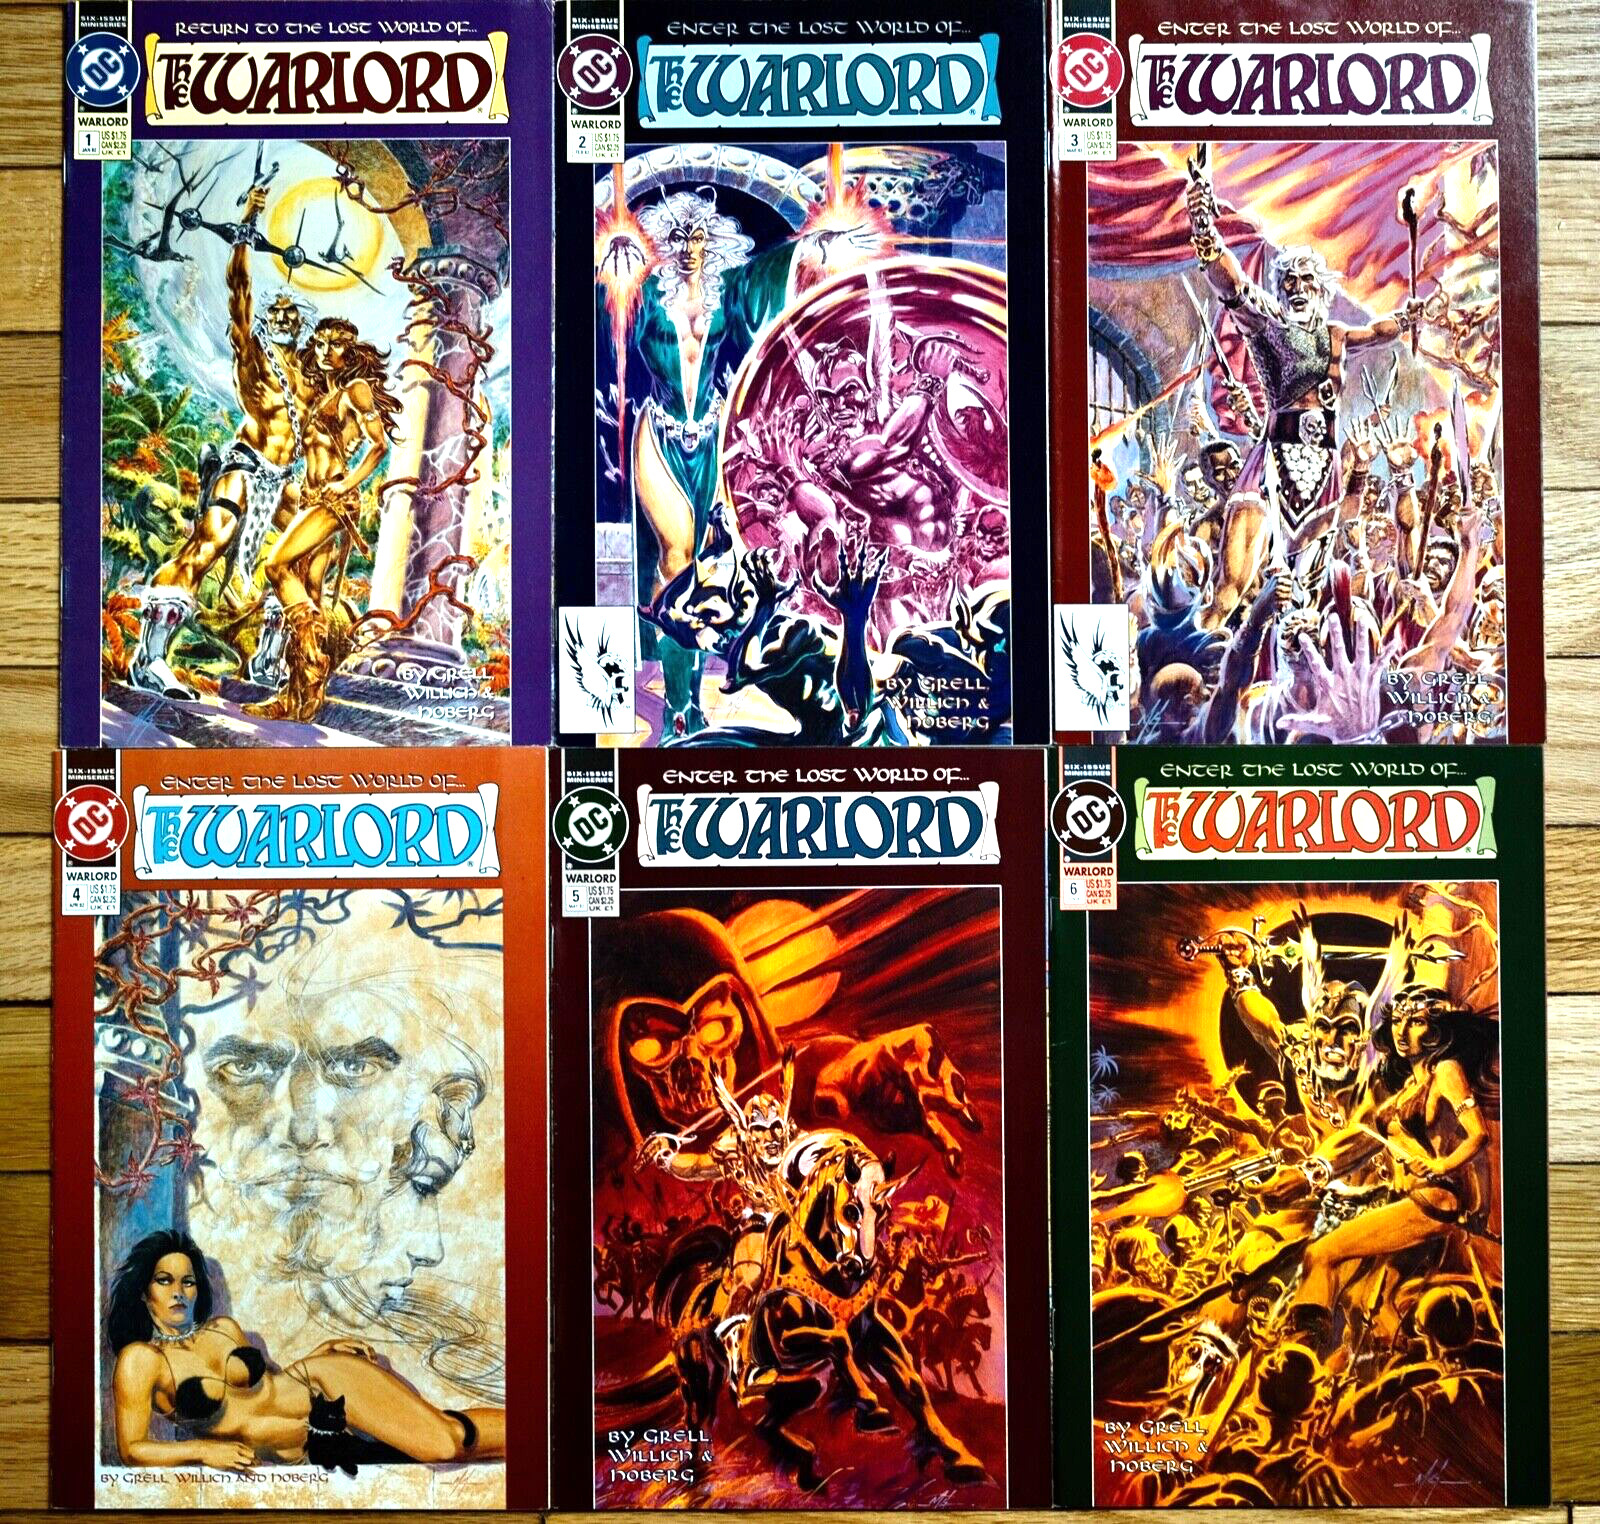 THE WARLORD (Vol.2, 1992) #1-6 NM complete mini-series FANTASY Danger Street DC